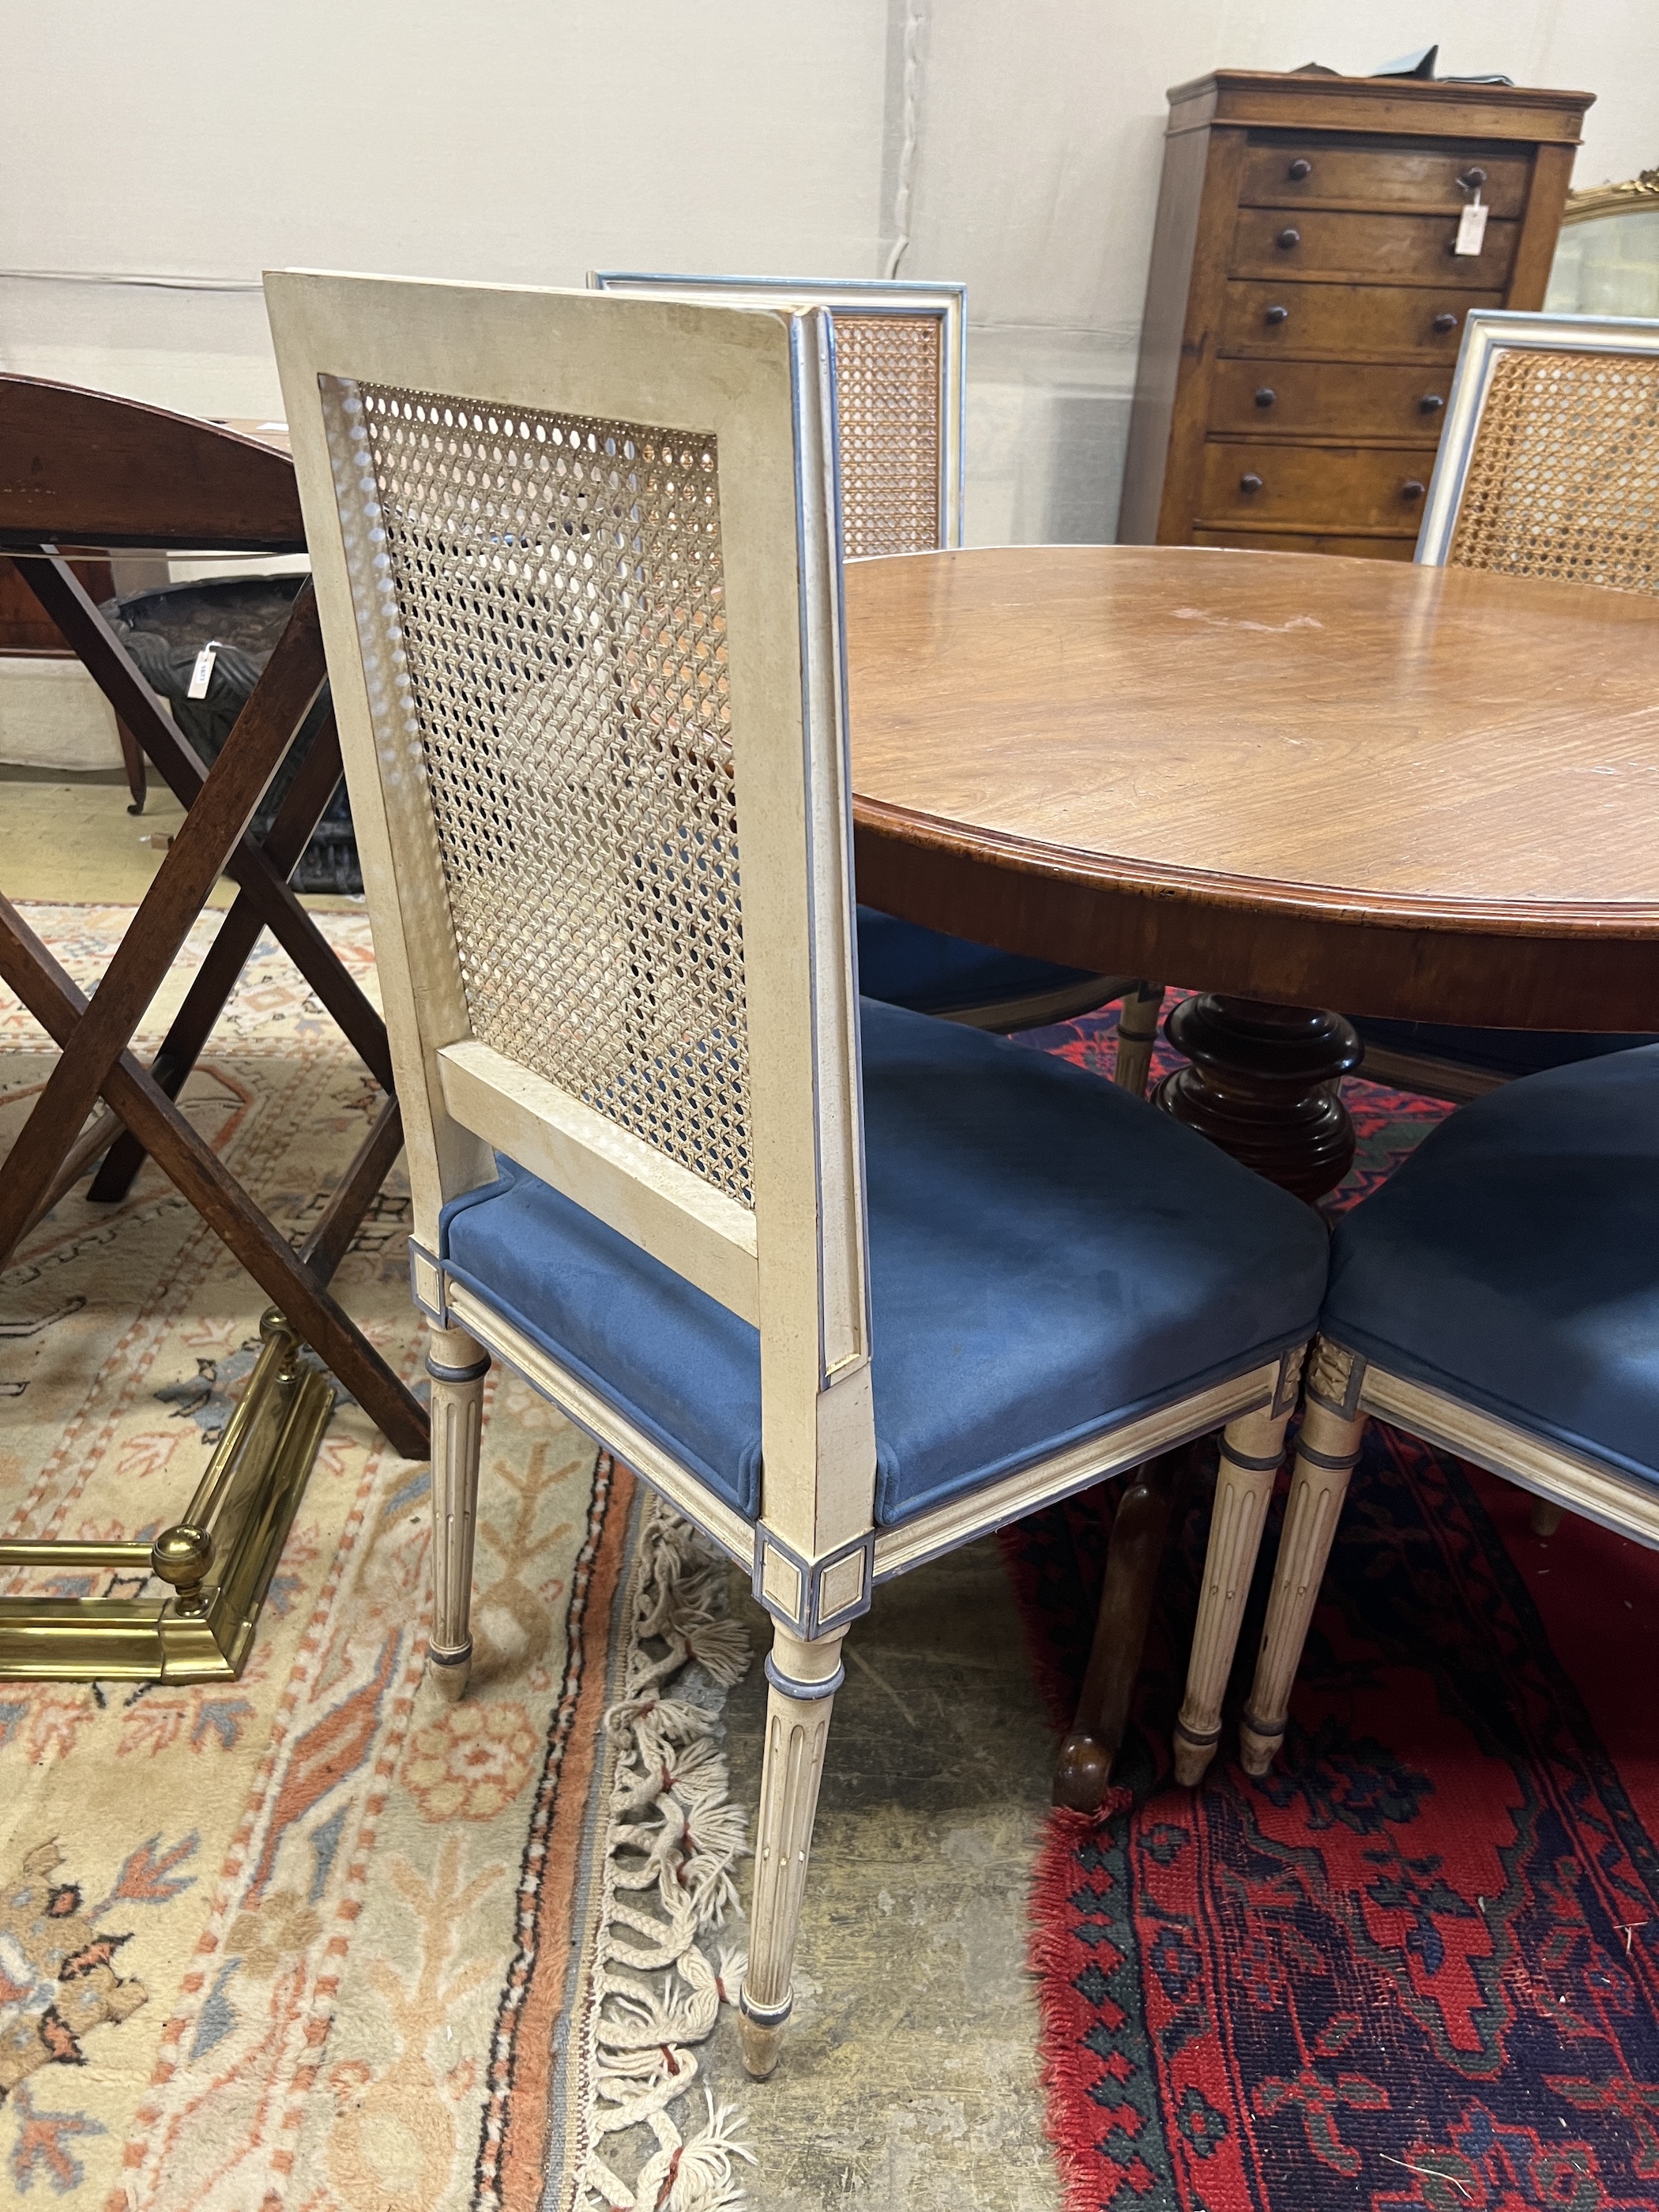 A set of four French style painted caned back dining chairs